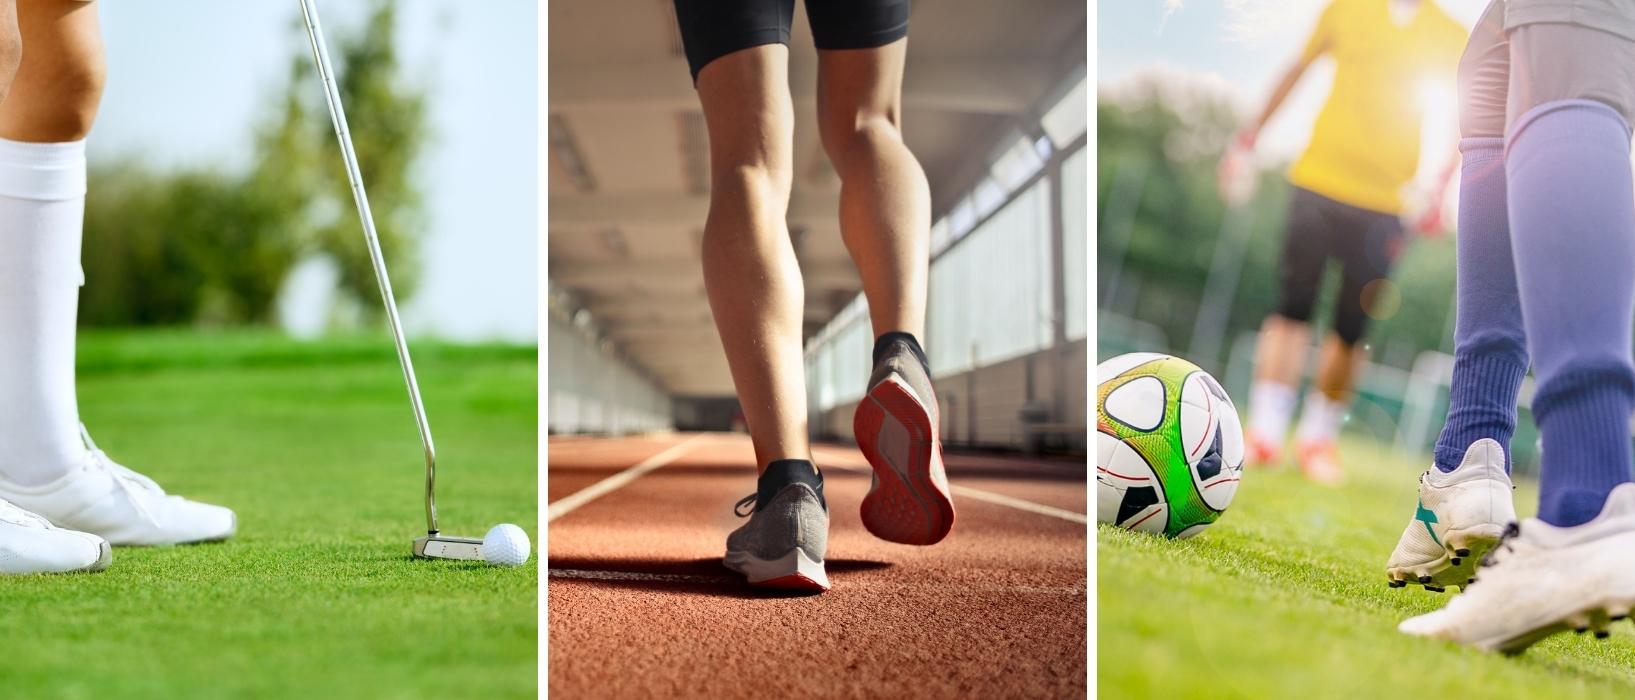 three images in a row all close-ups of ankles/shoes, first is person taking a golf swing, second is person running on athletics track, third is someone about to kick a football